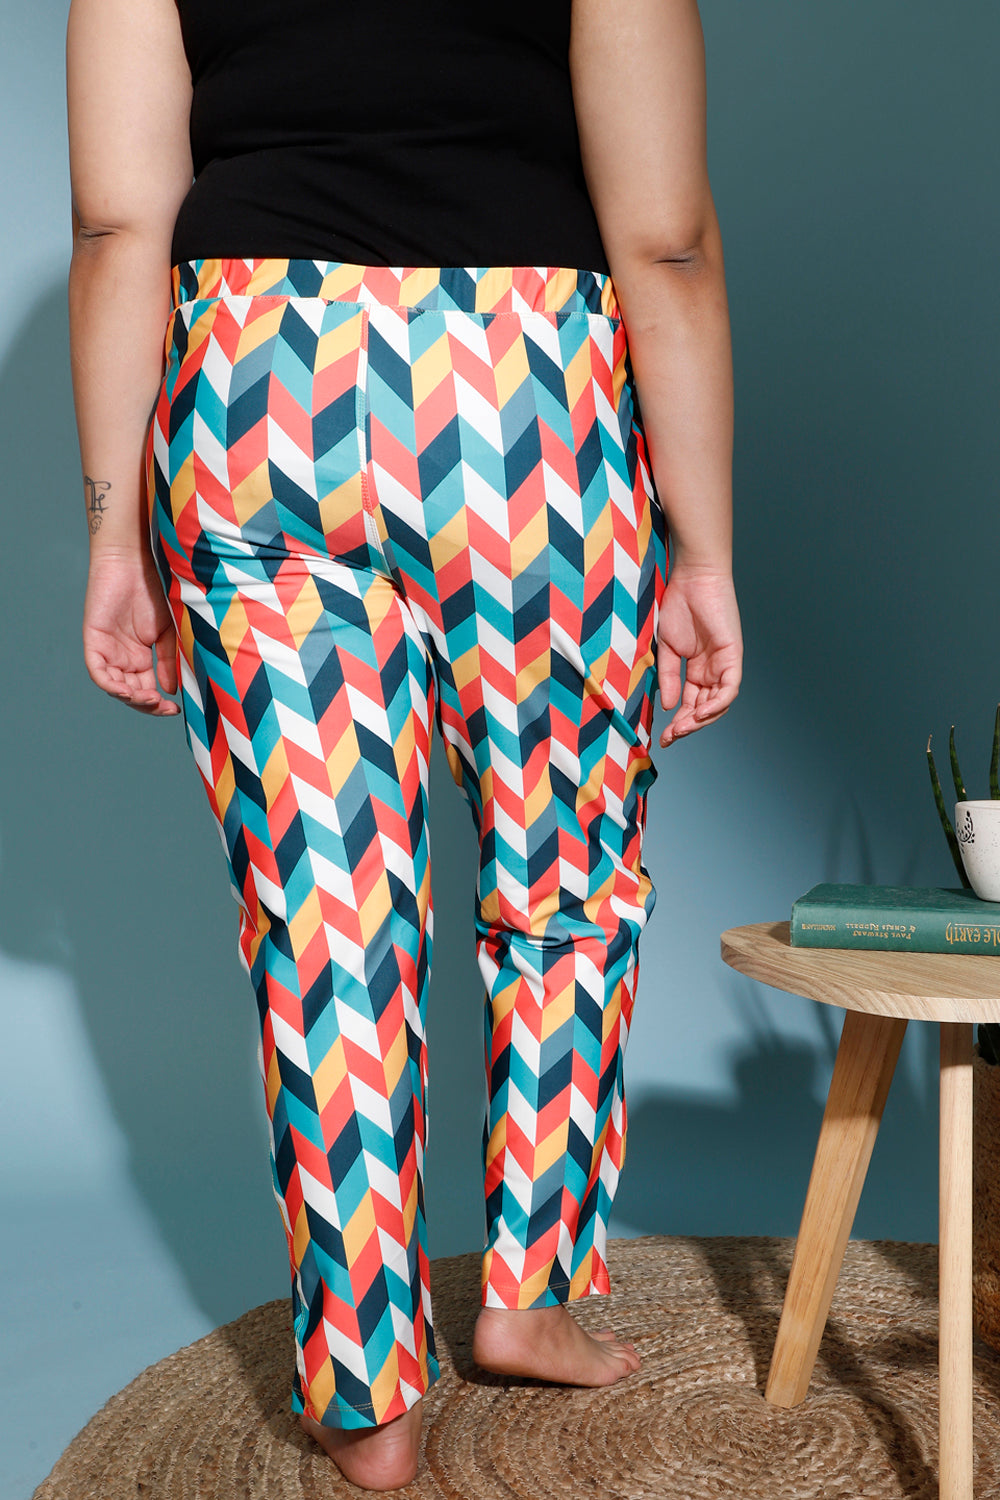 Quirky Chevron Printed Lounge Pants for Women